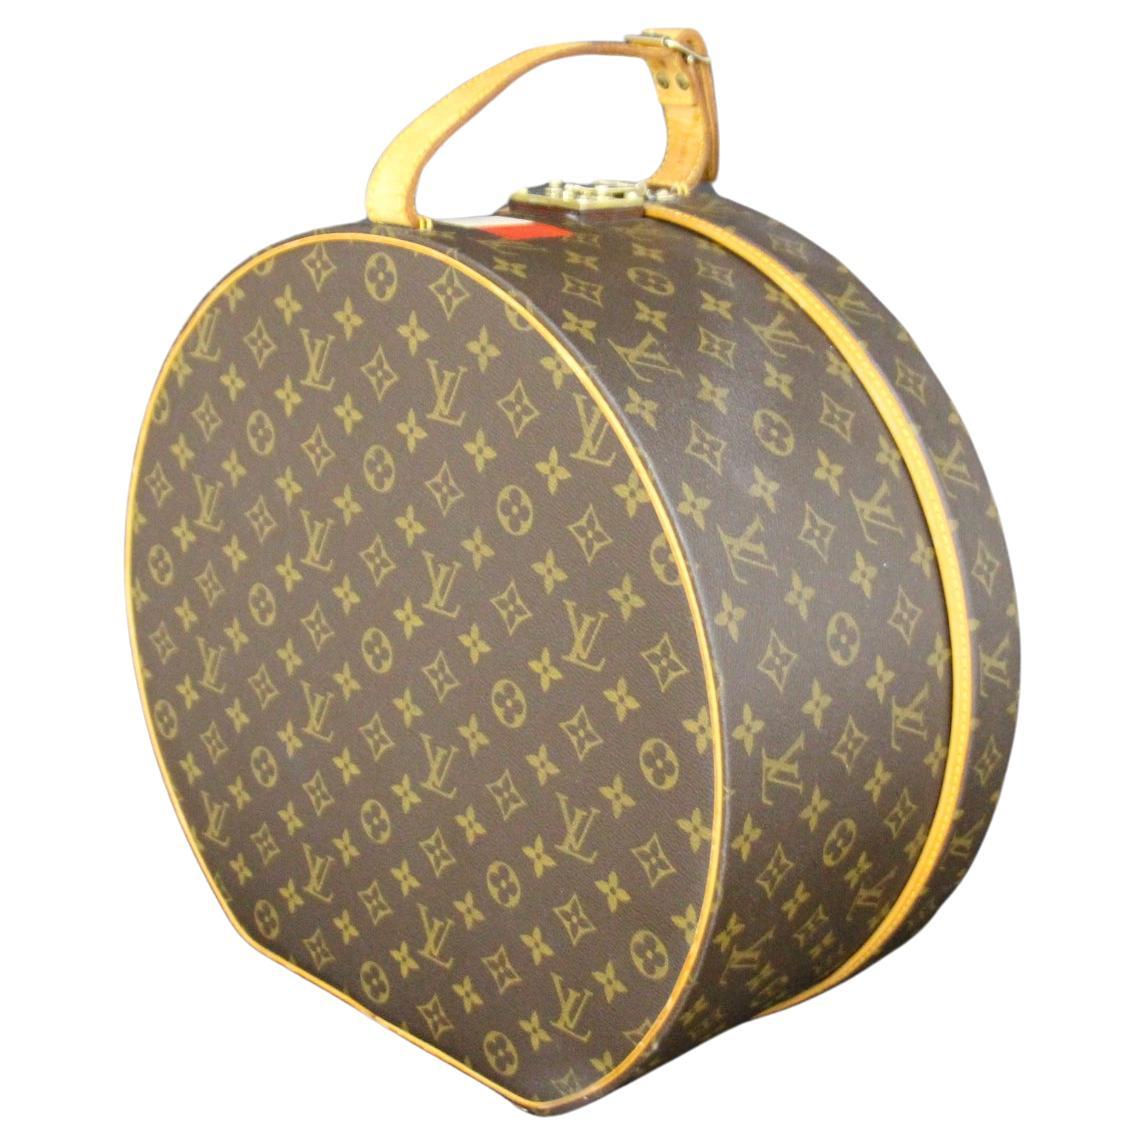 When did LV start using coated canvas?